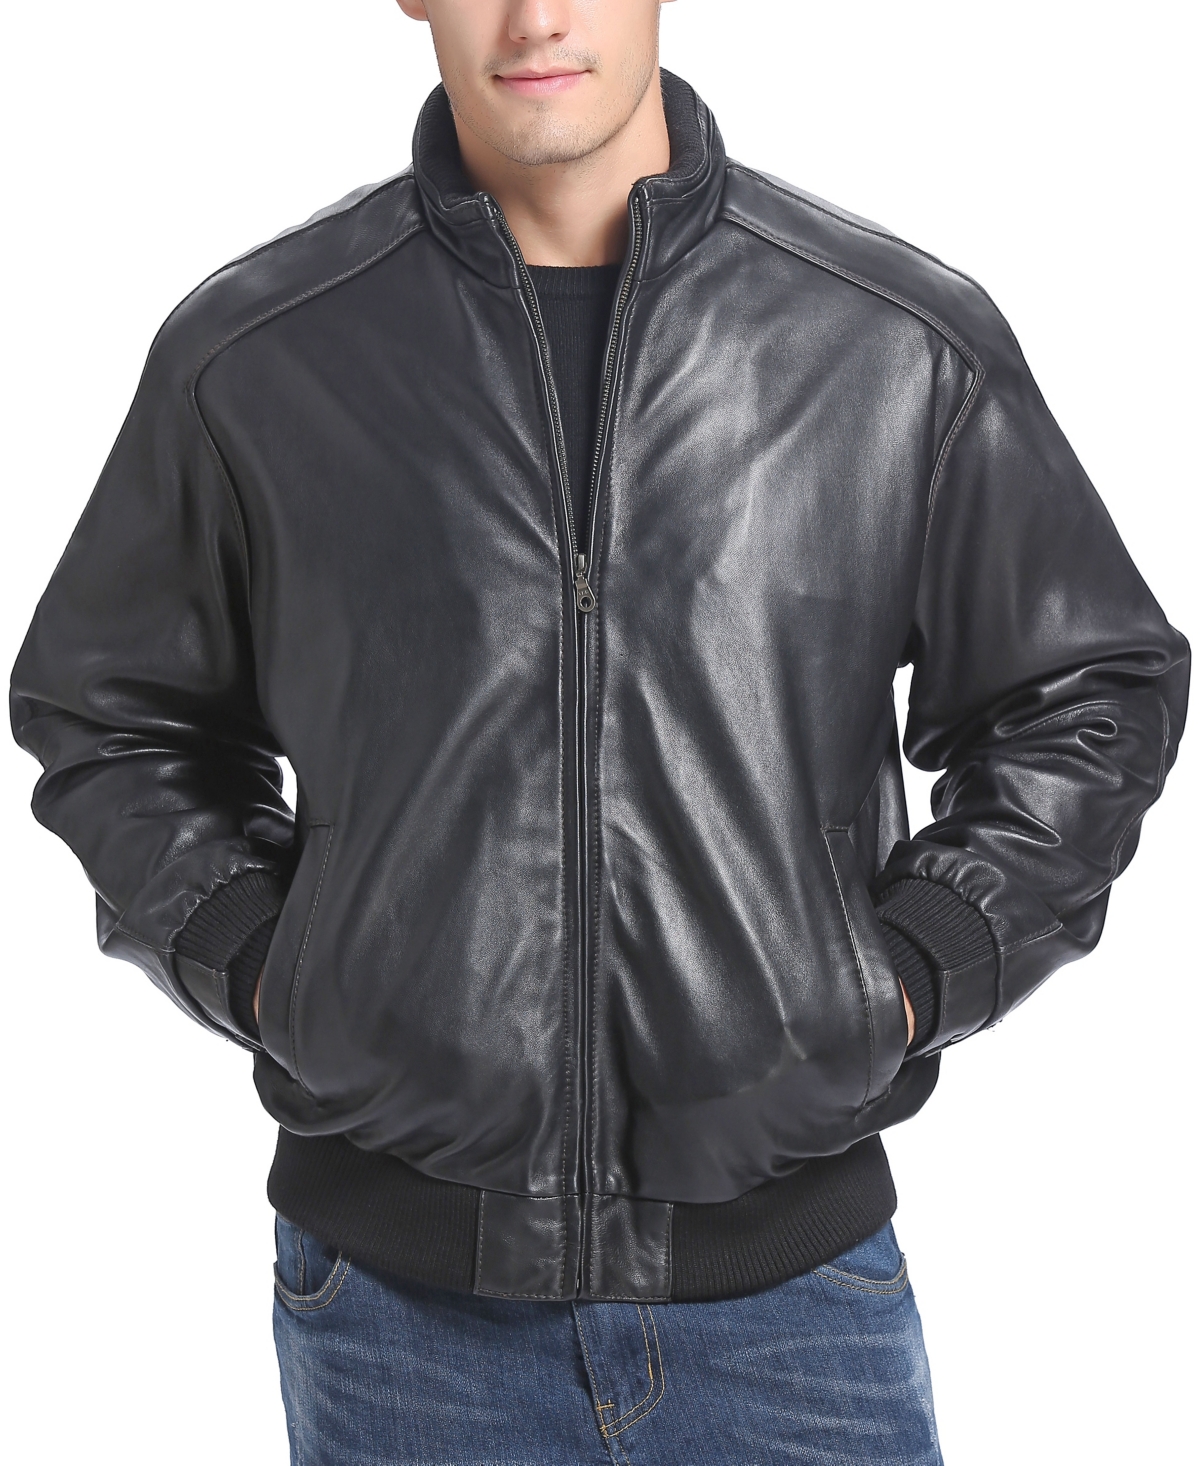 Men City Leather Bomber Jacket - Big and Tall - Black